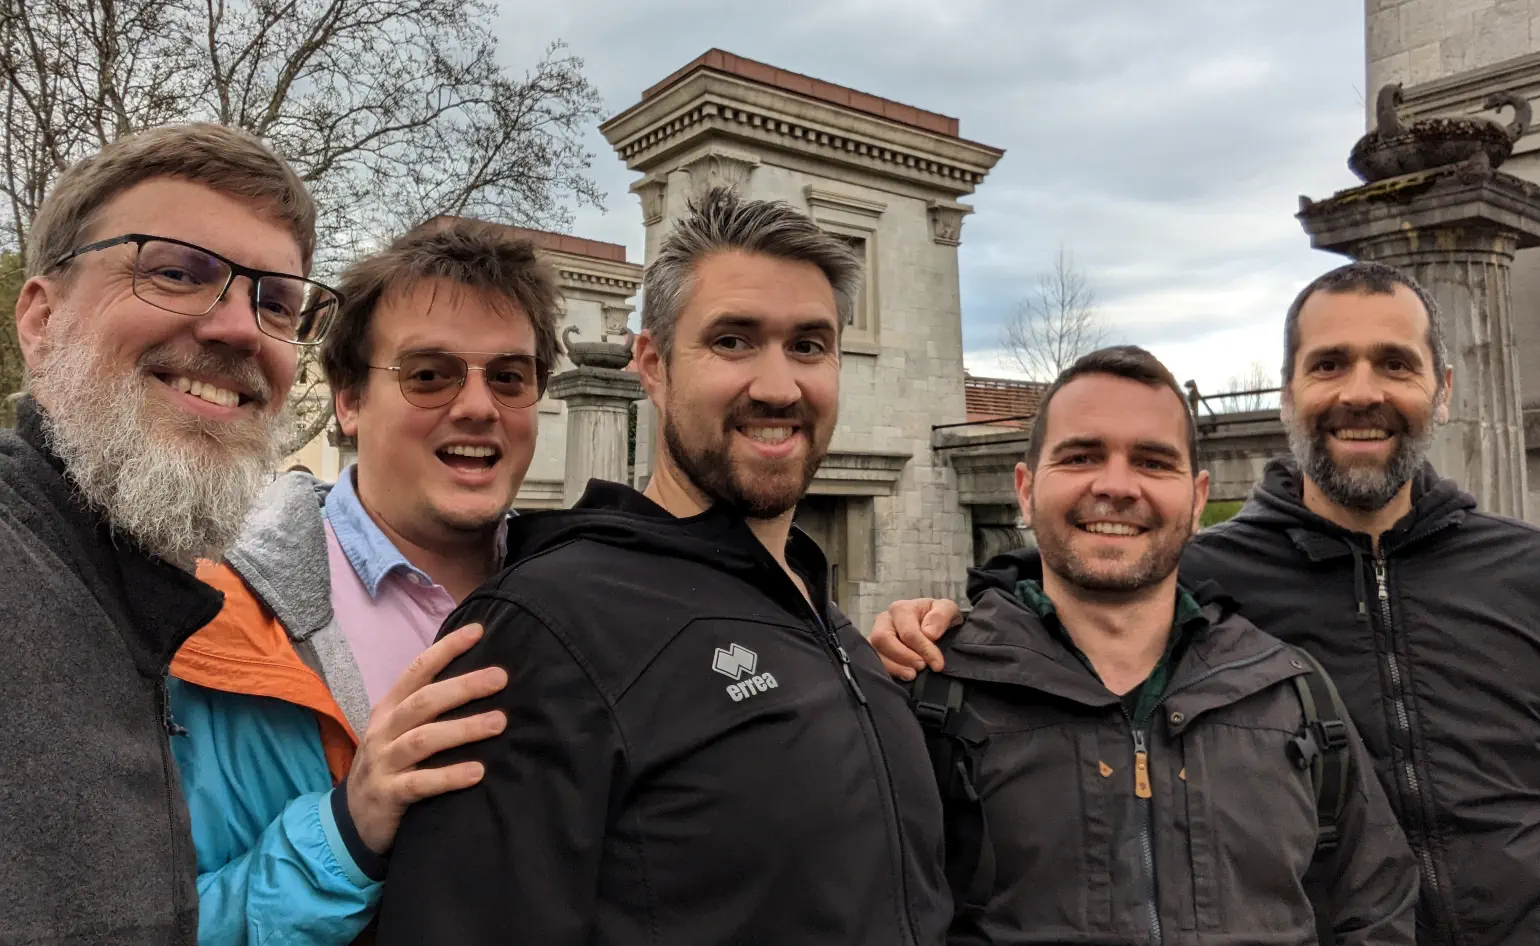 5 men smiling for the camera outside against classic pillar and walls